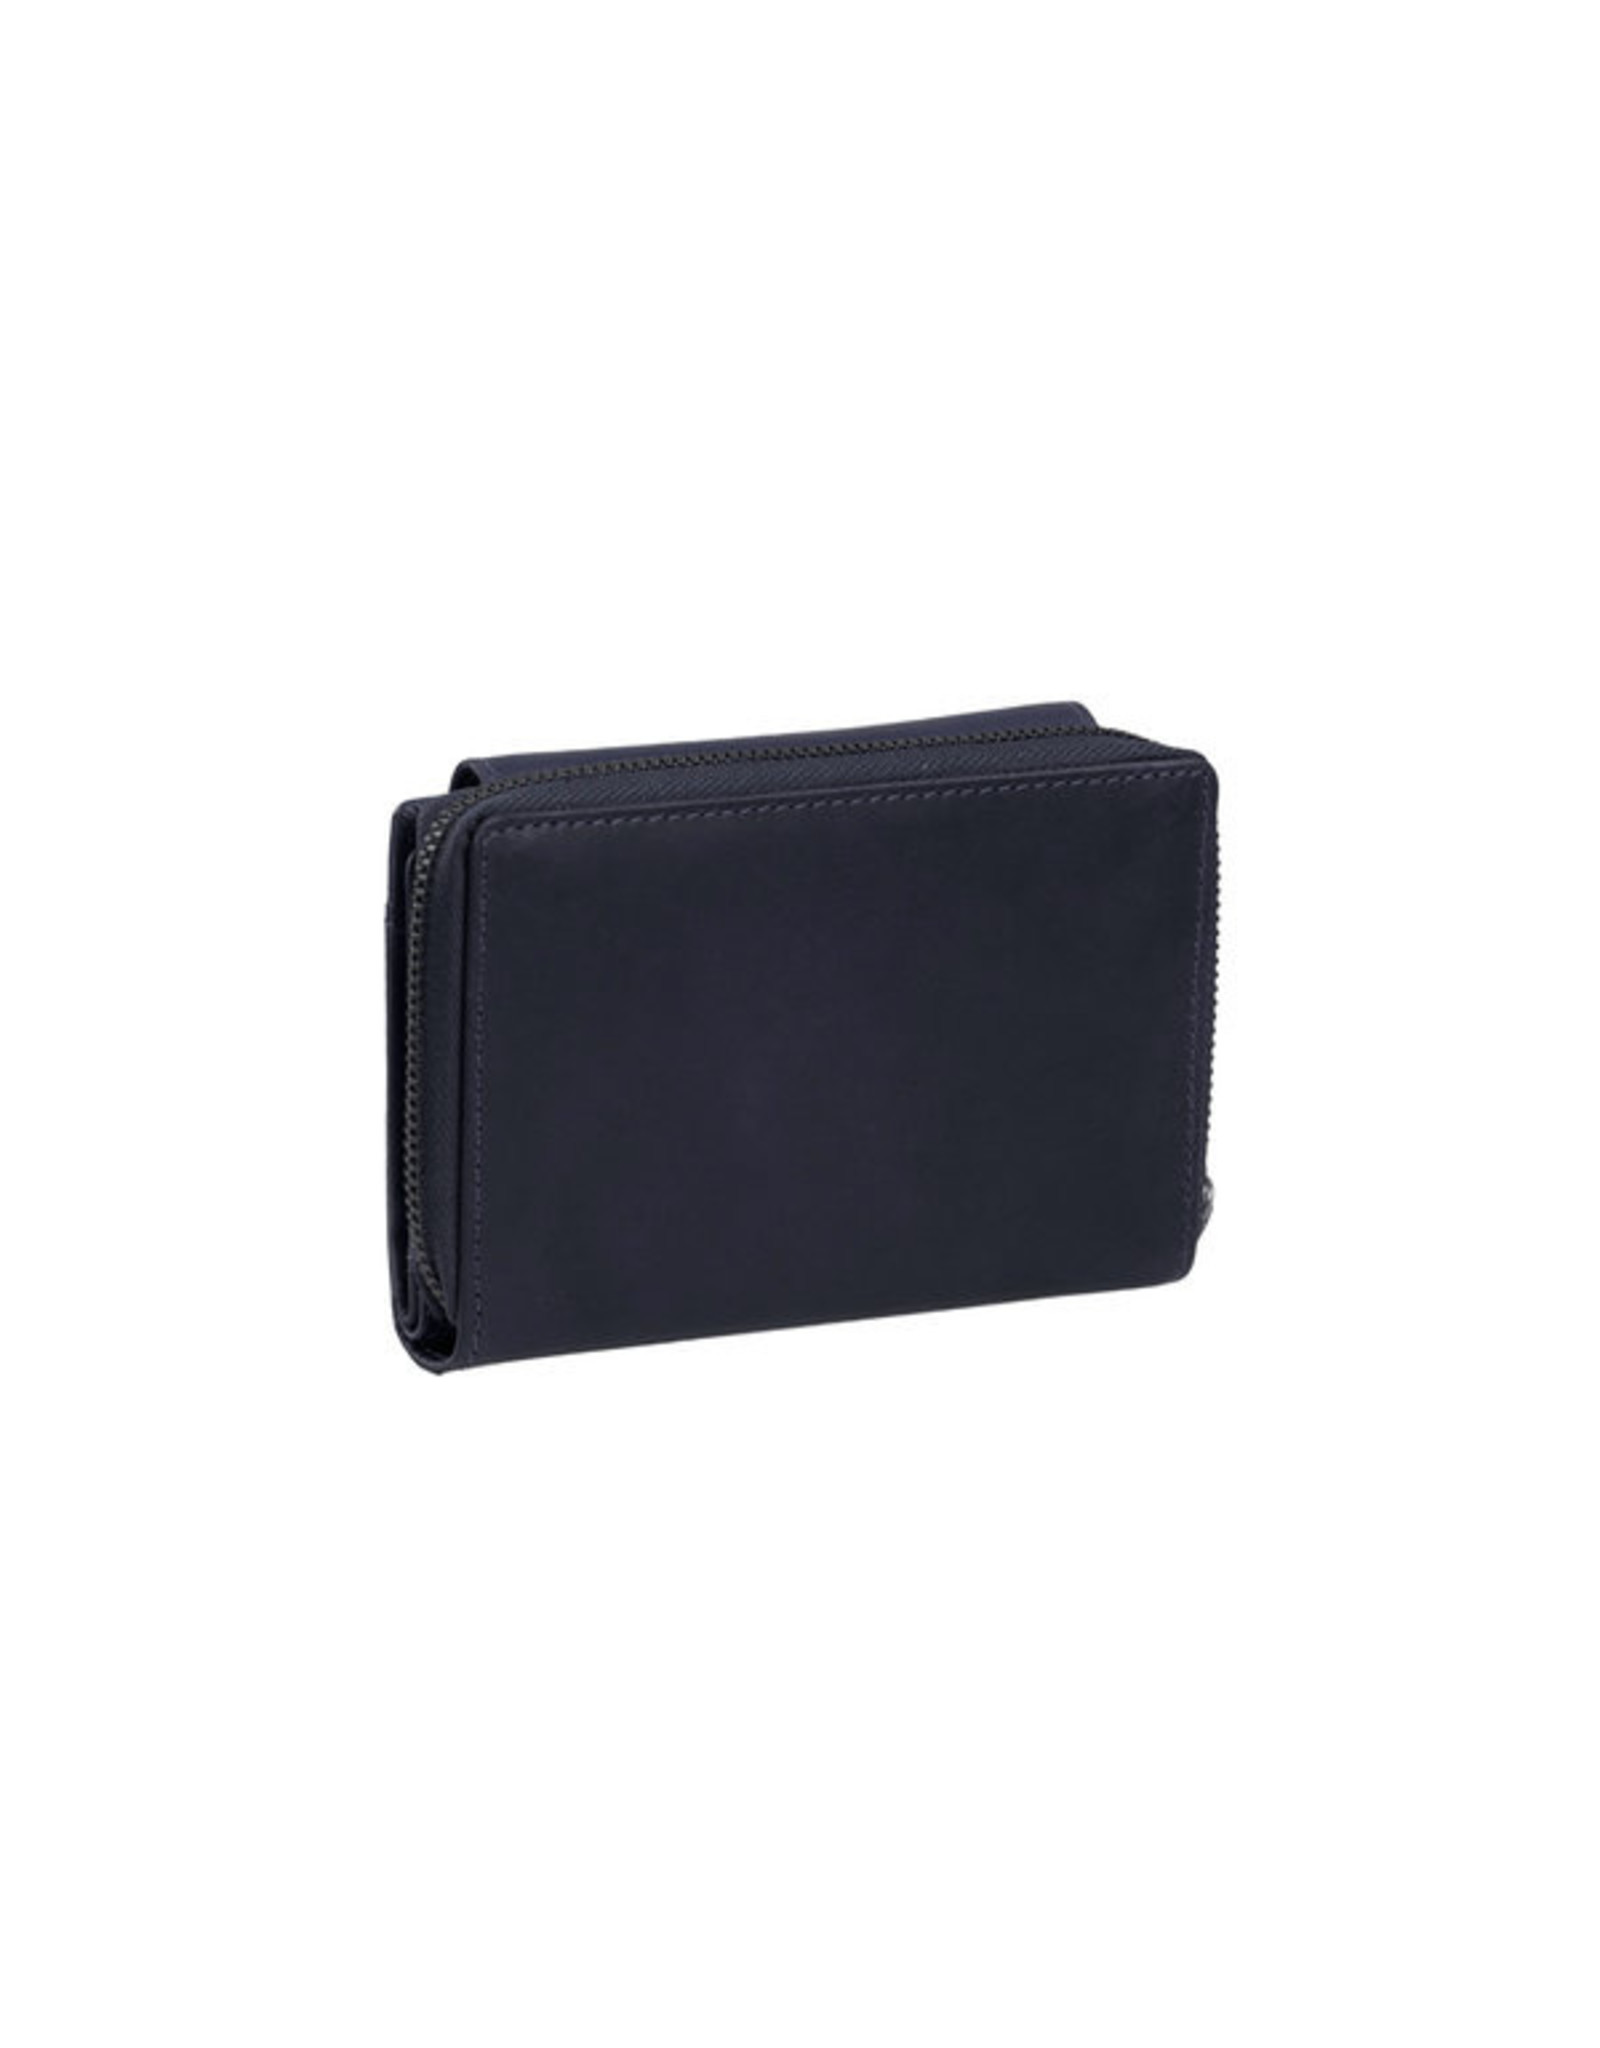 Chesterfield The Chesterfield Brand Ladies Wallet Ascot